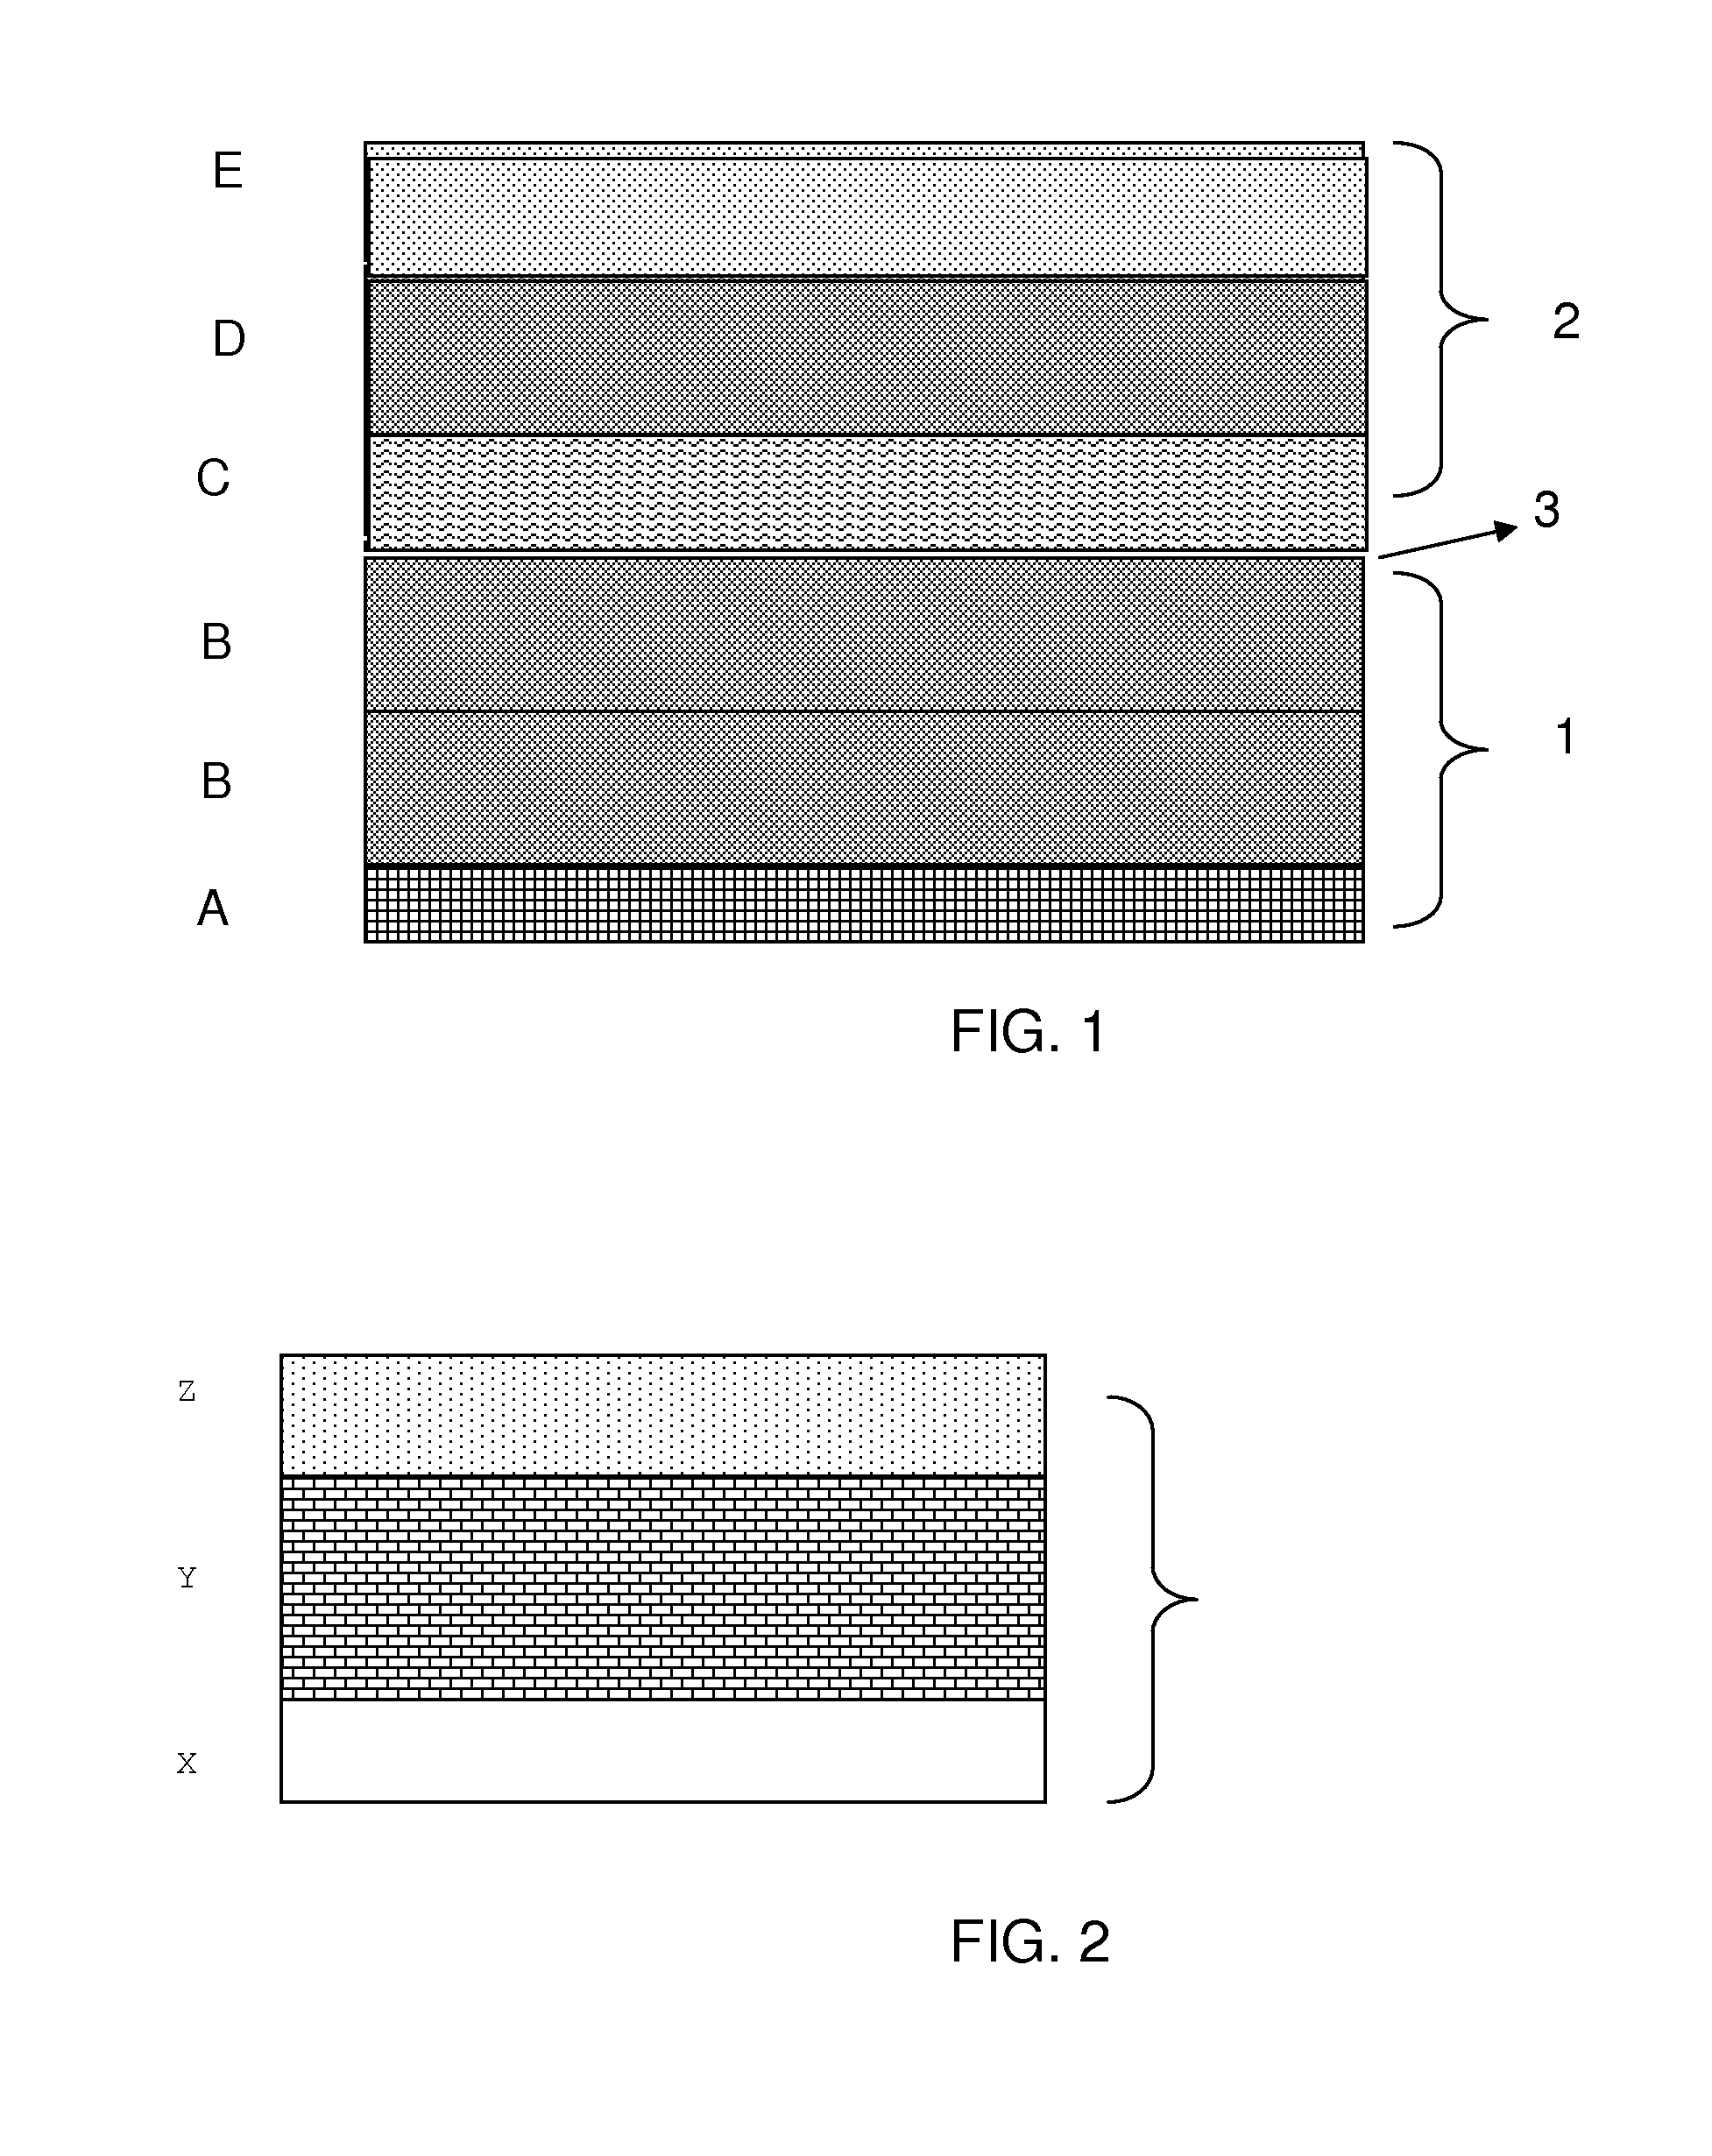 Single polymer film structures for use in stand-up-pouches